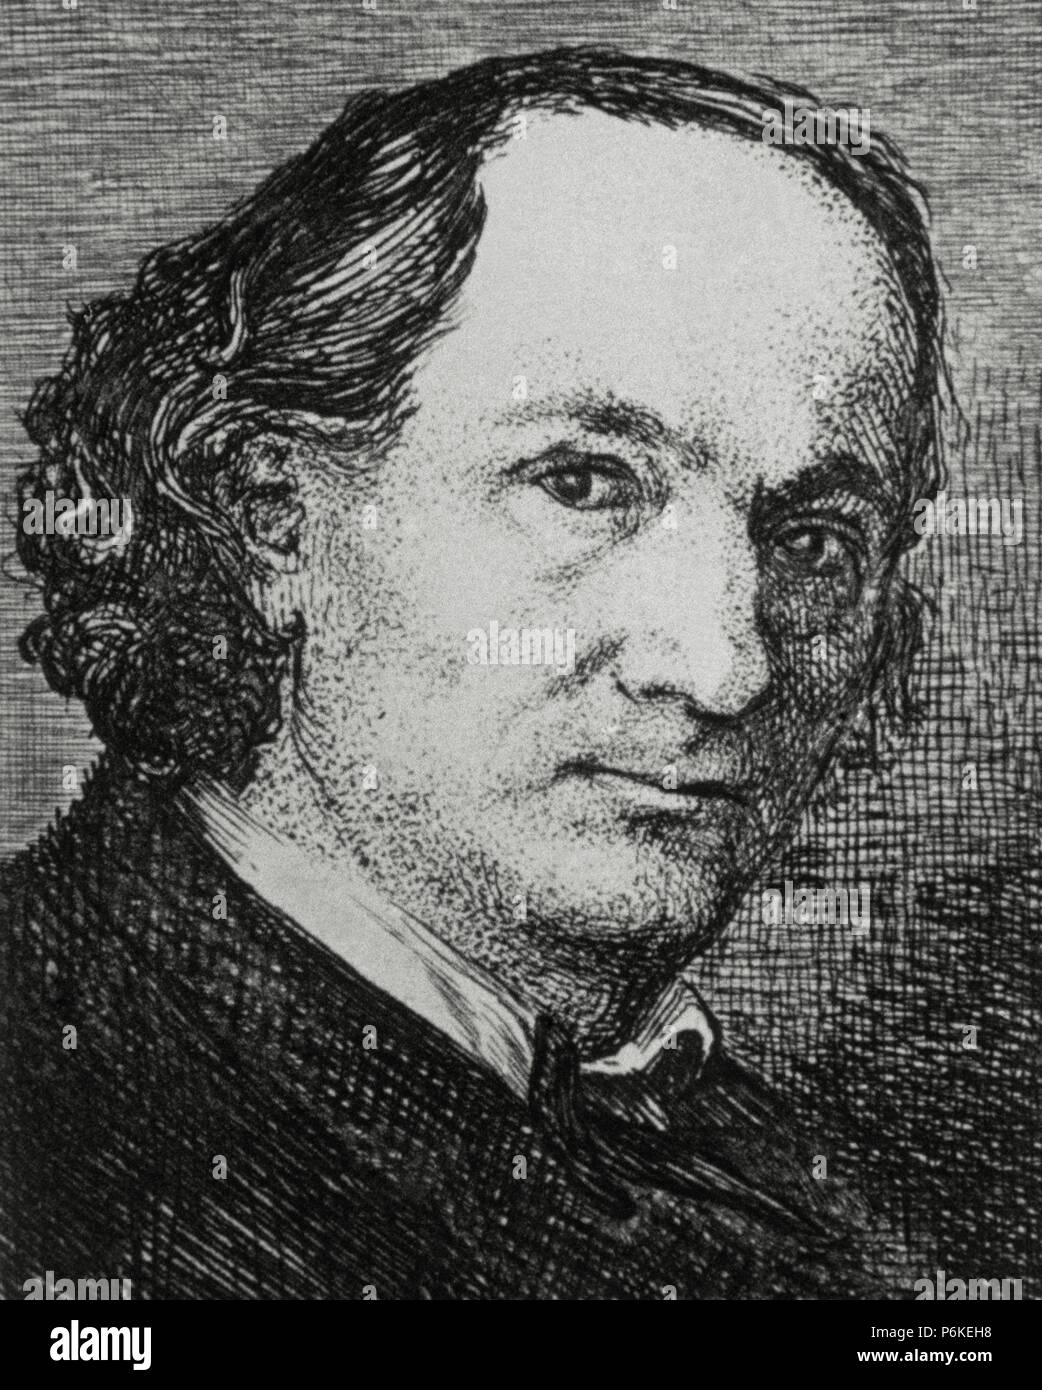 Charles Pierre Baudelaire (1821-1867). French poet. Portrait. Engraving ...